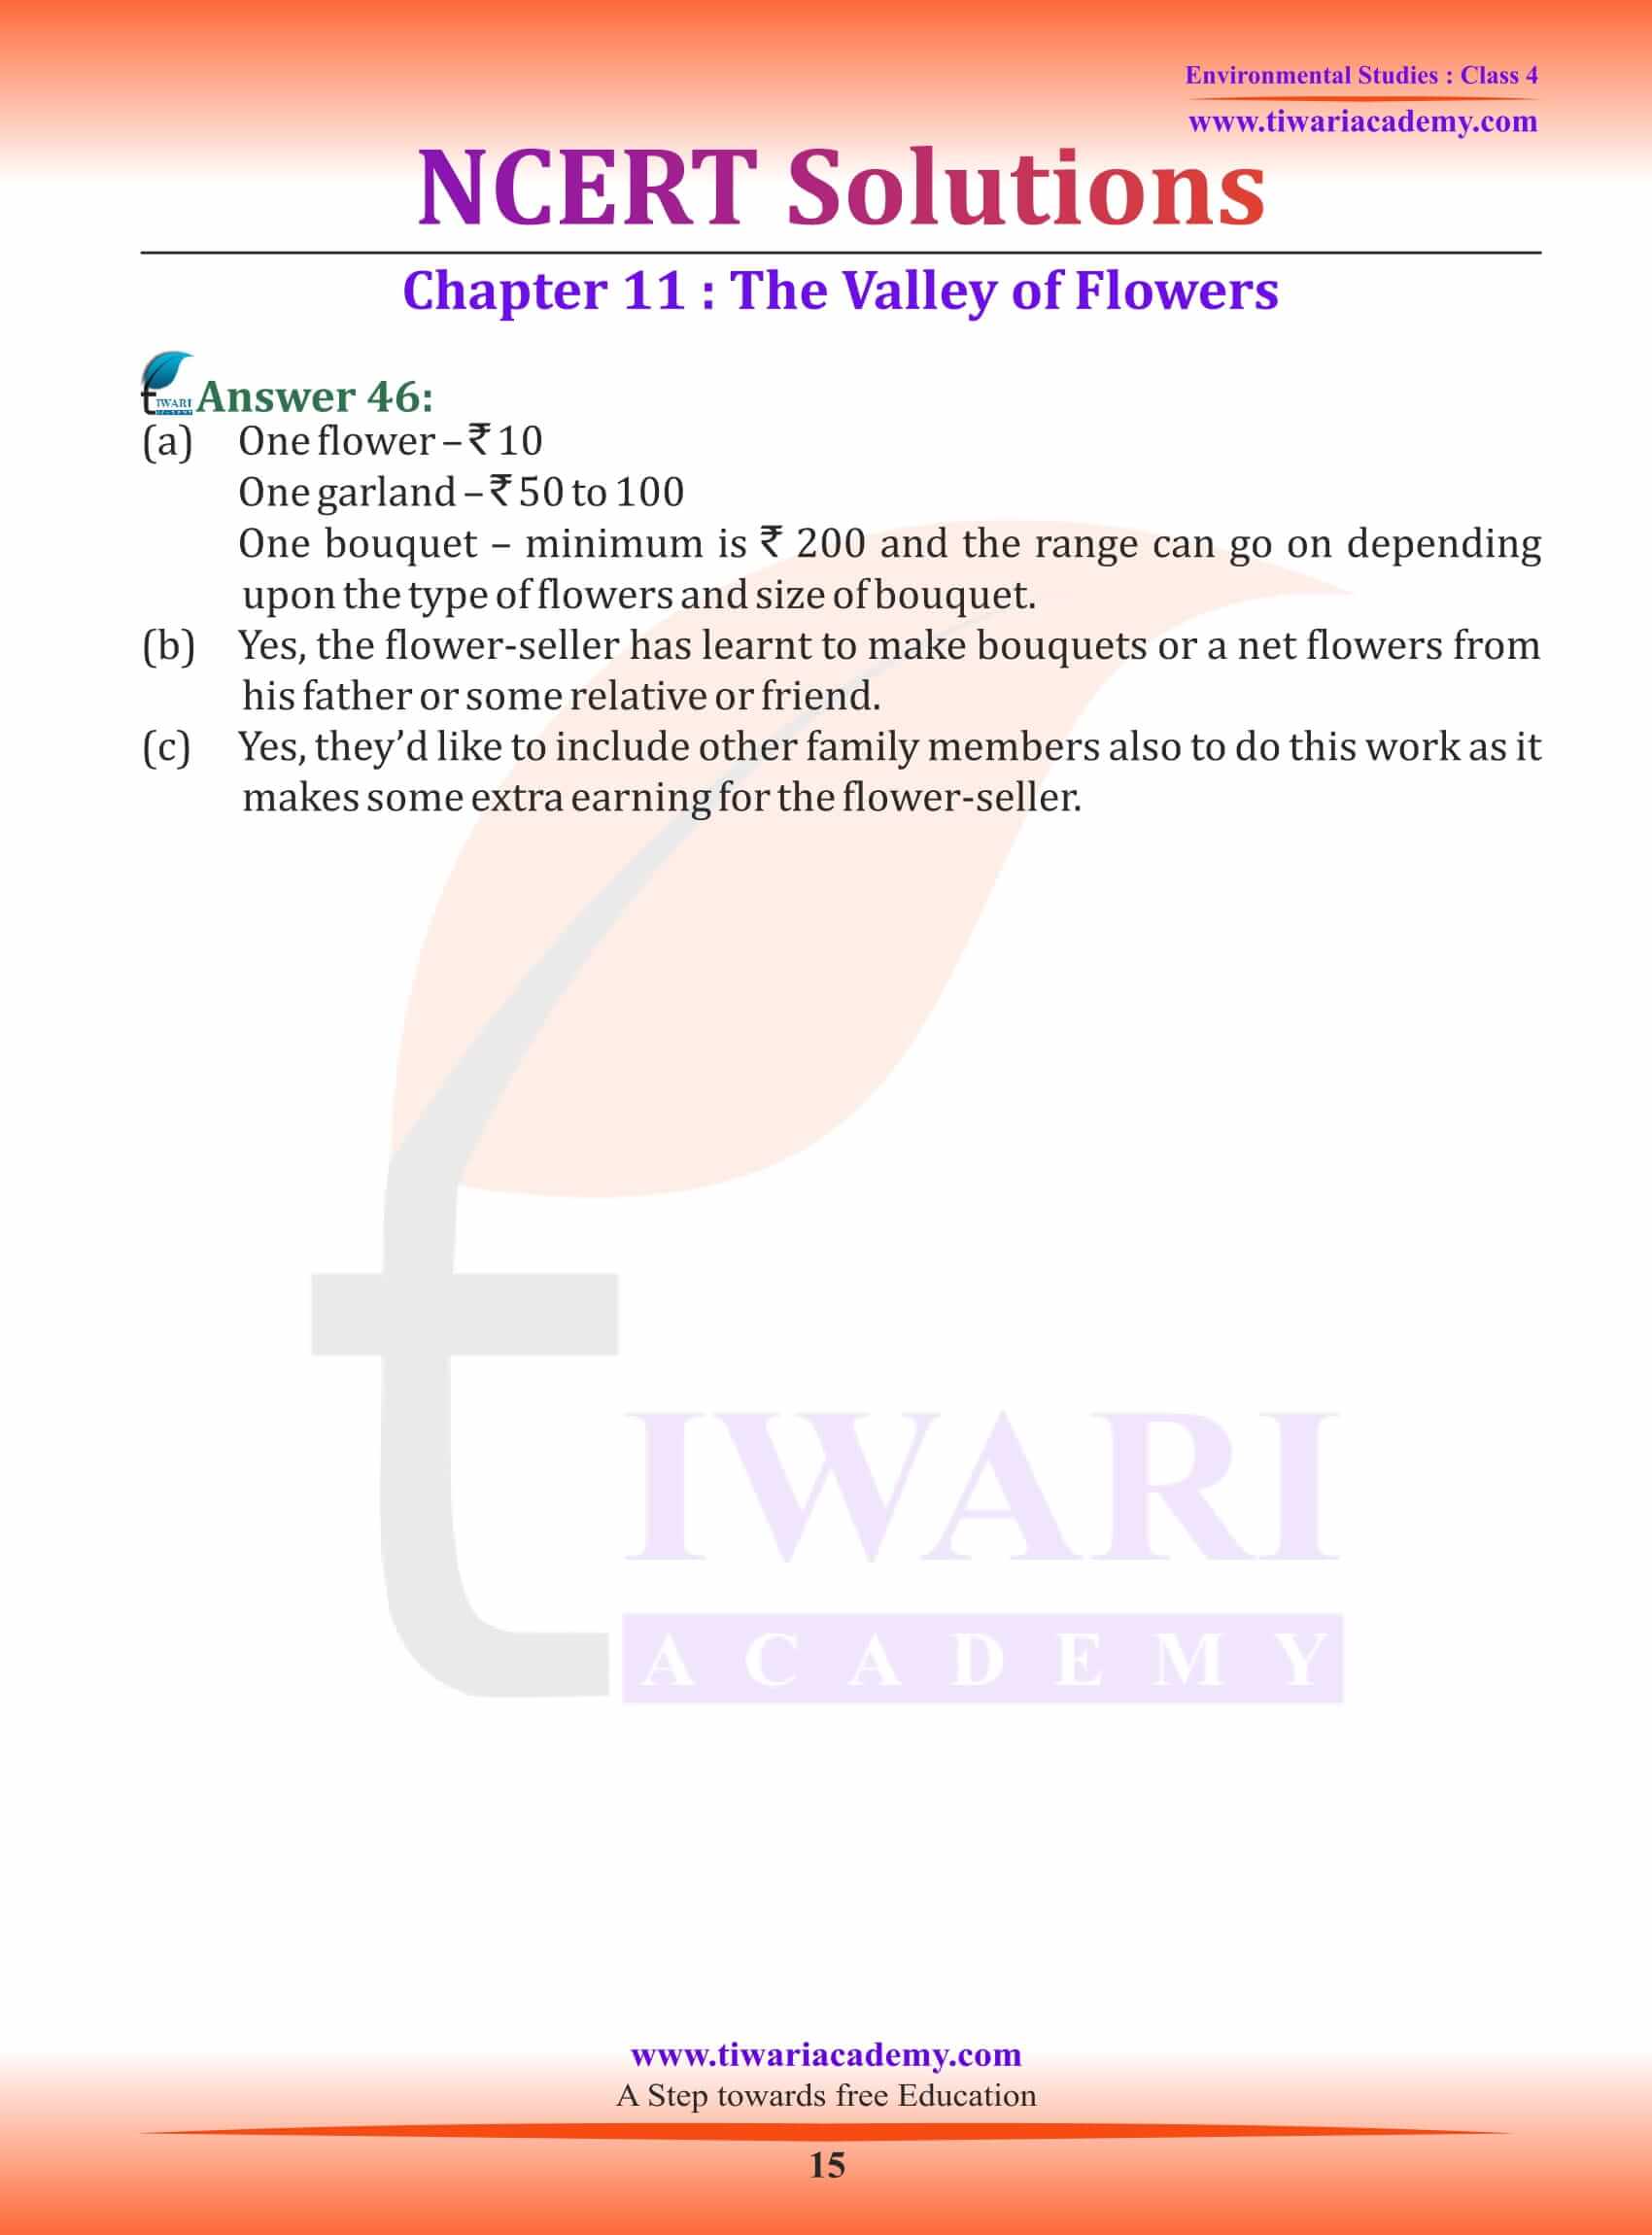 NCERT Solutions for Class 4 EVS Chapter 11 all answes